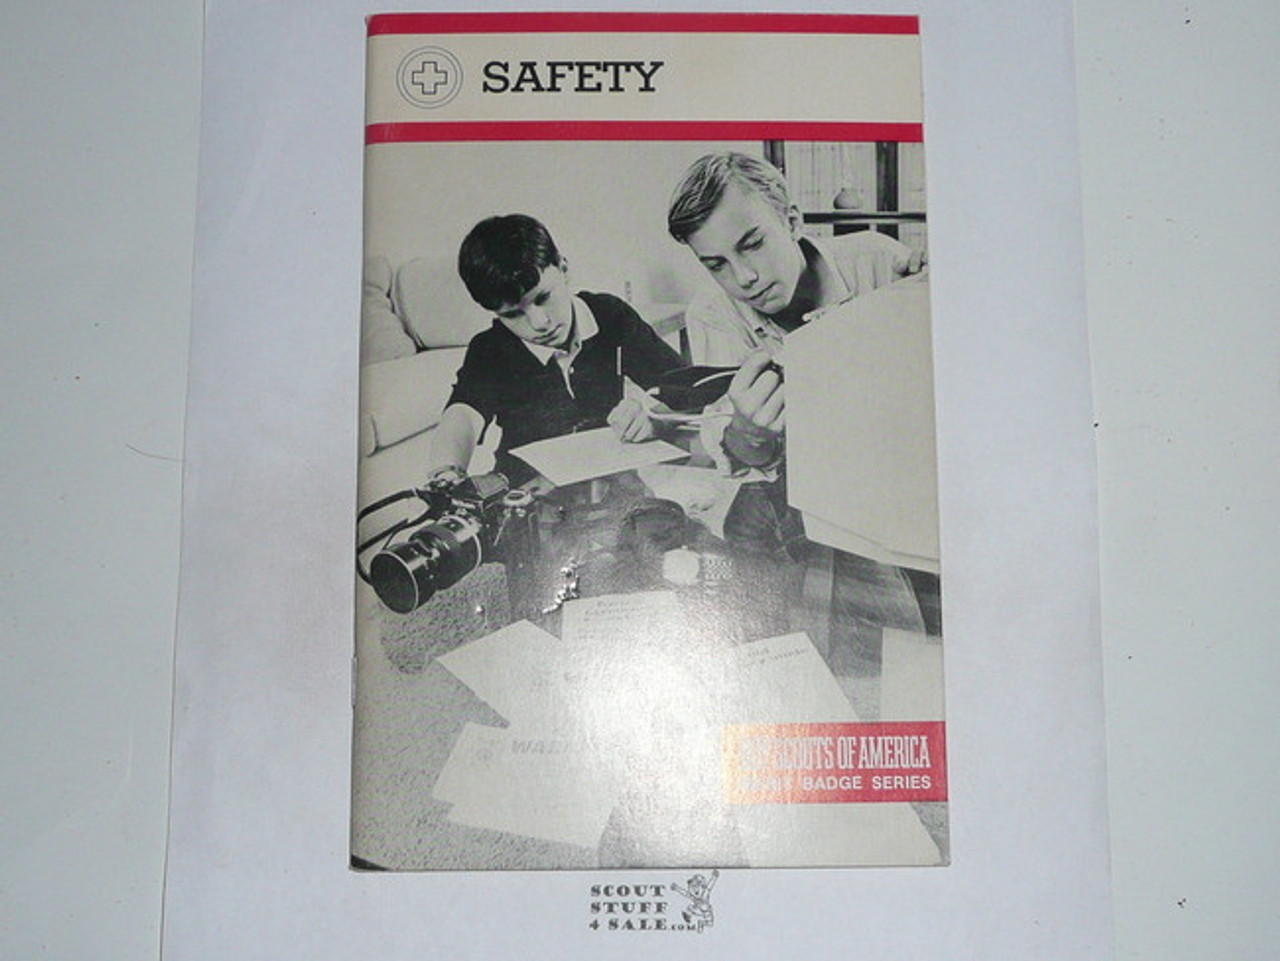 Safety Merit Badge Pamphlet, Type 9, Red Band Cover, 8-88 Printing